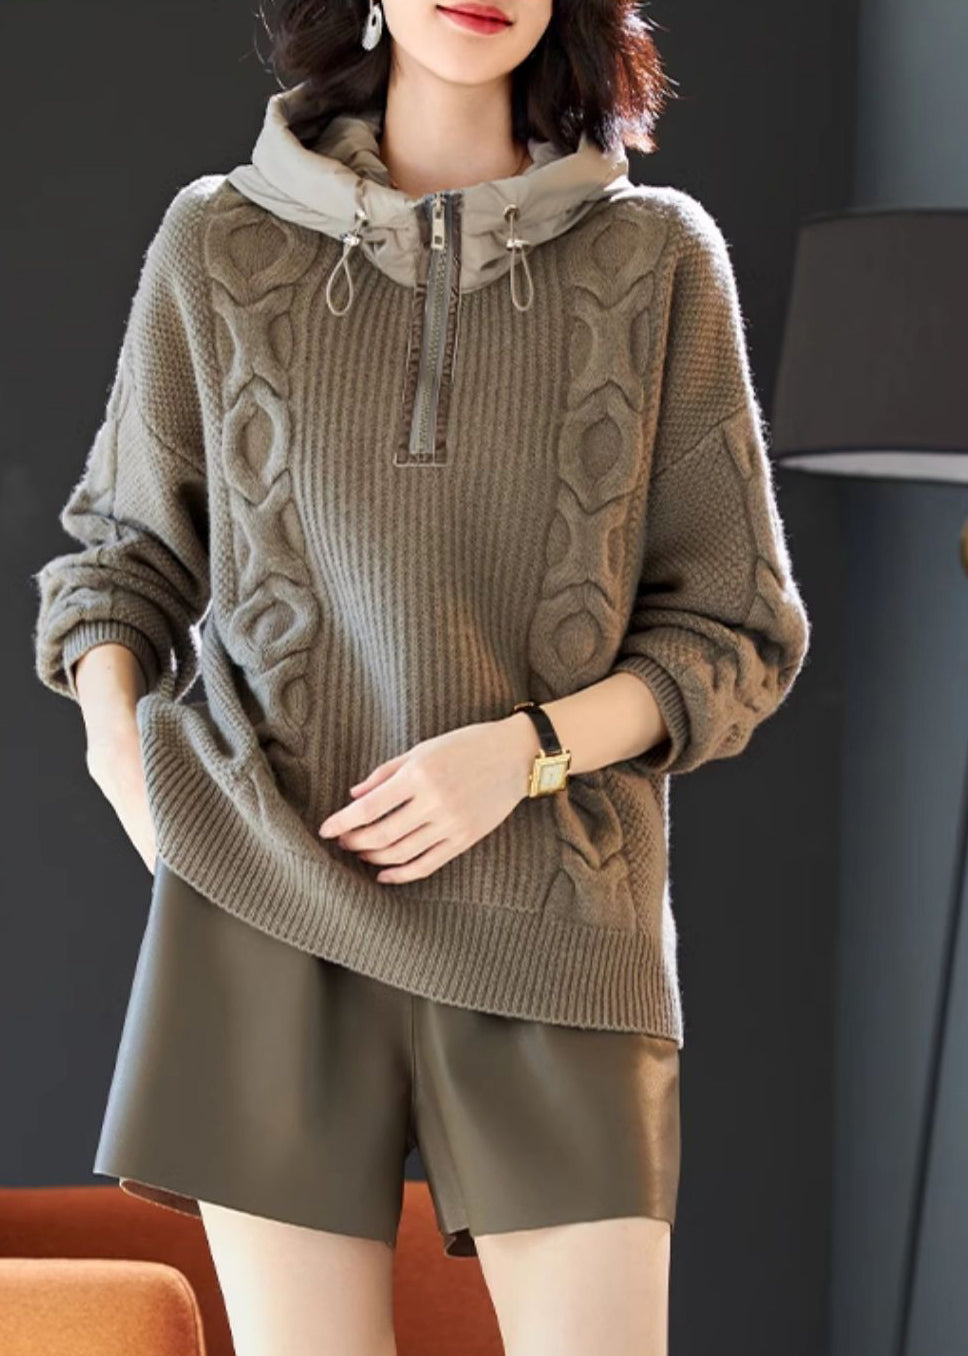 Casual Grey Hooded Patchwork Knit Sweatshirts Top Winter